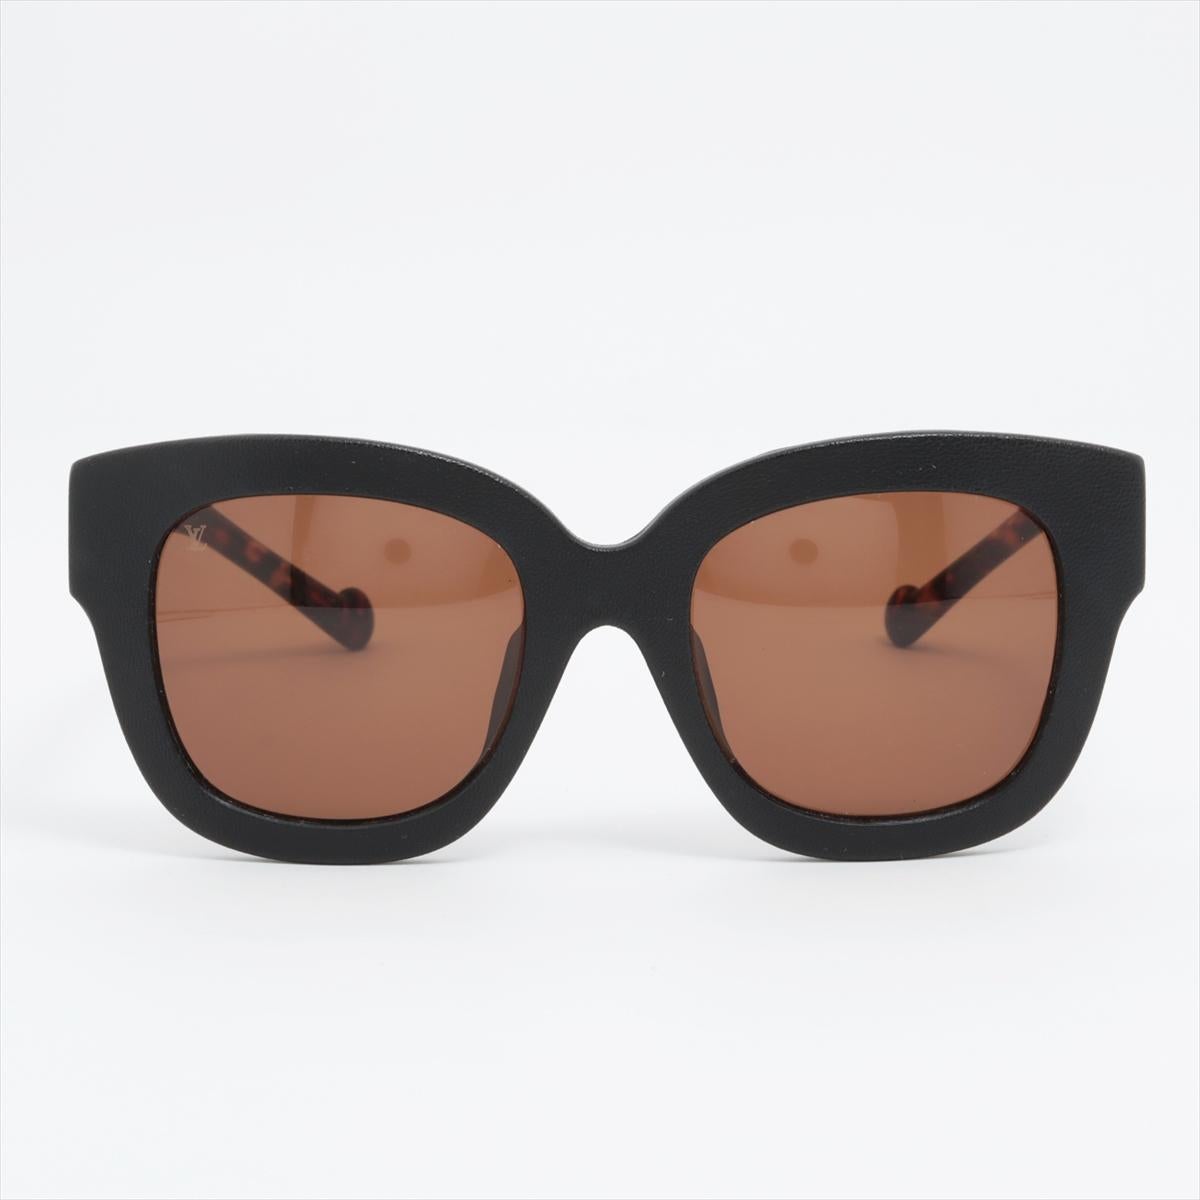 The Louis Vuitton Plastic Sunglasses in Dark Tortoise offer a timeless and sophisticated accessory for any occasion. Crafted from high-quality plastic, the sunglasses feature a combination of classic dark tortoise and black frames that exude